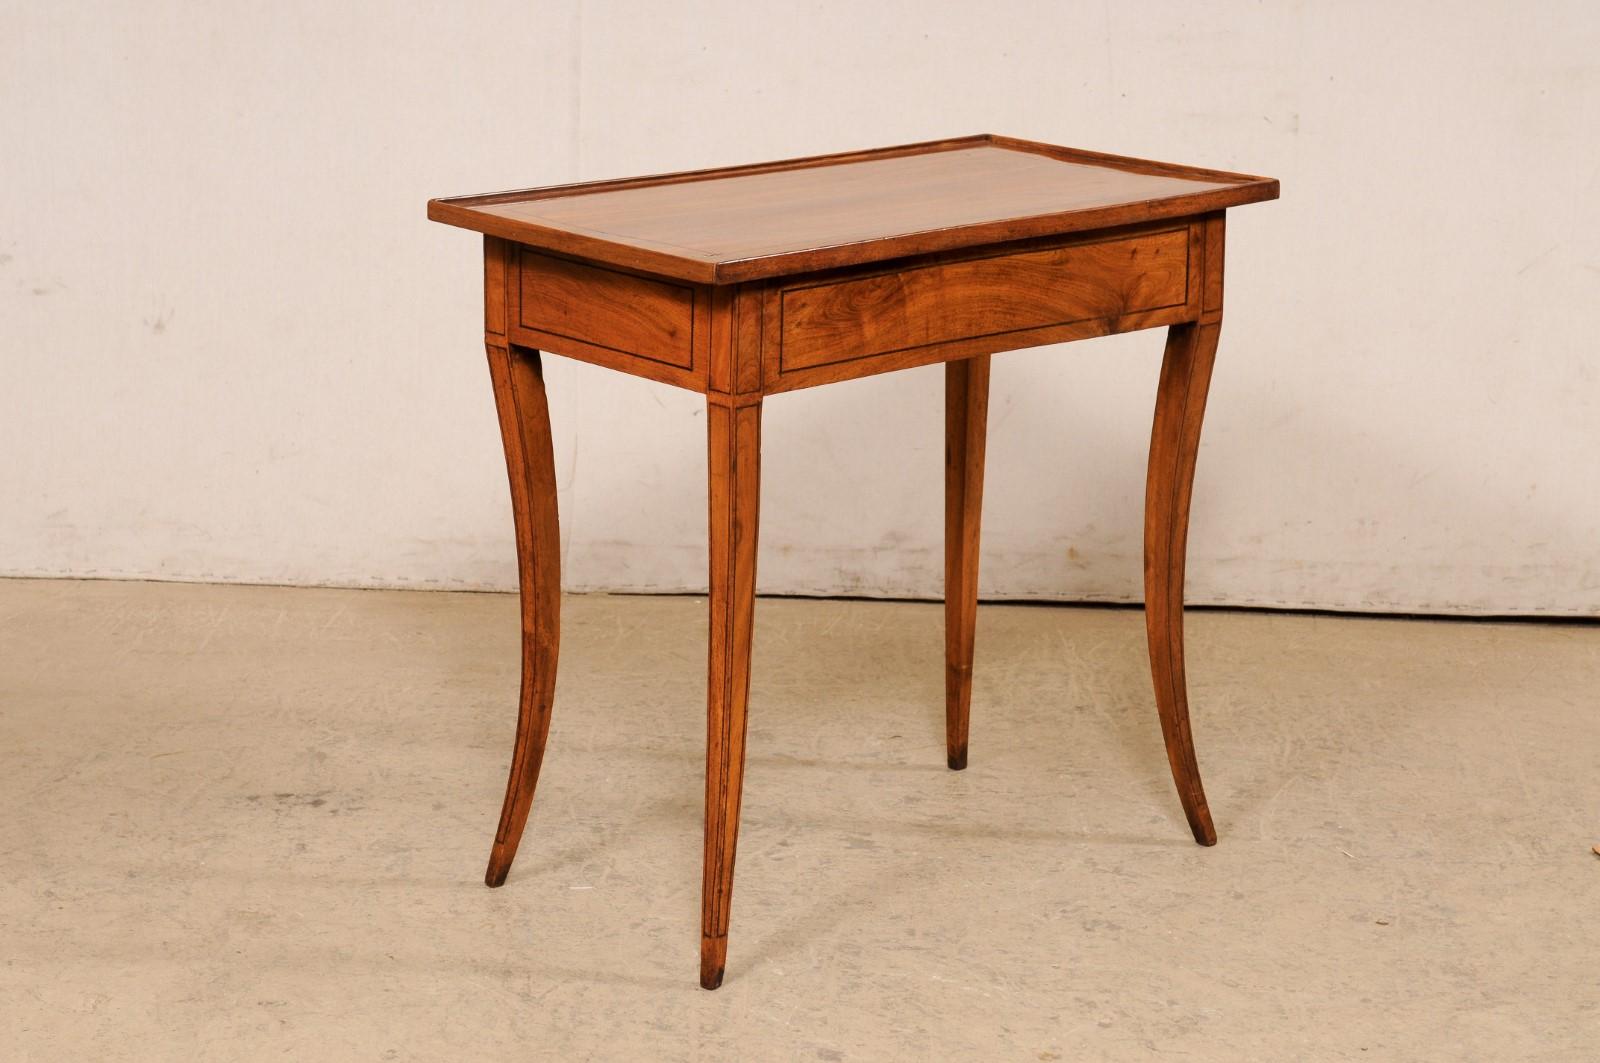 An Early 19th C. Italian Occasional Table w/Inlay Accents & Elegant Sabre Legs For Sale 4